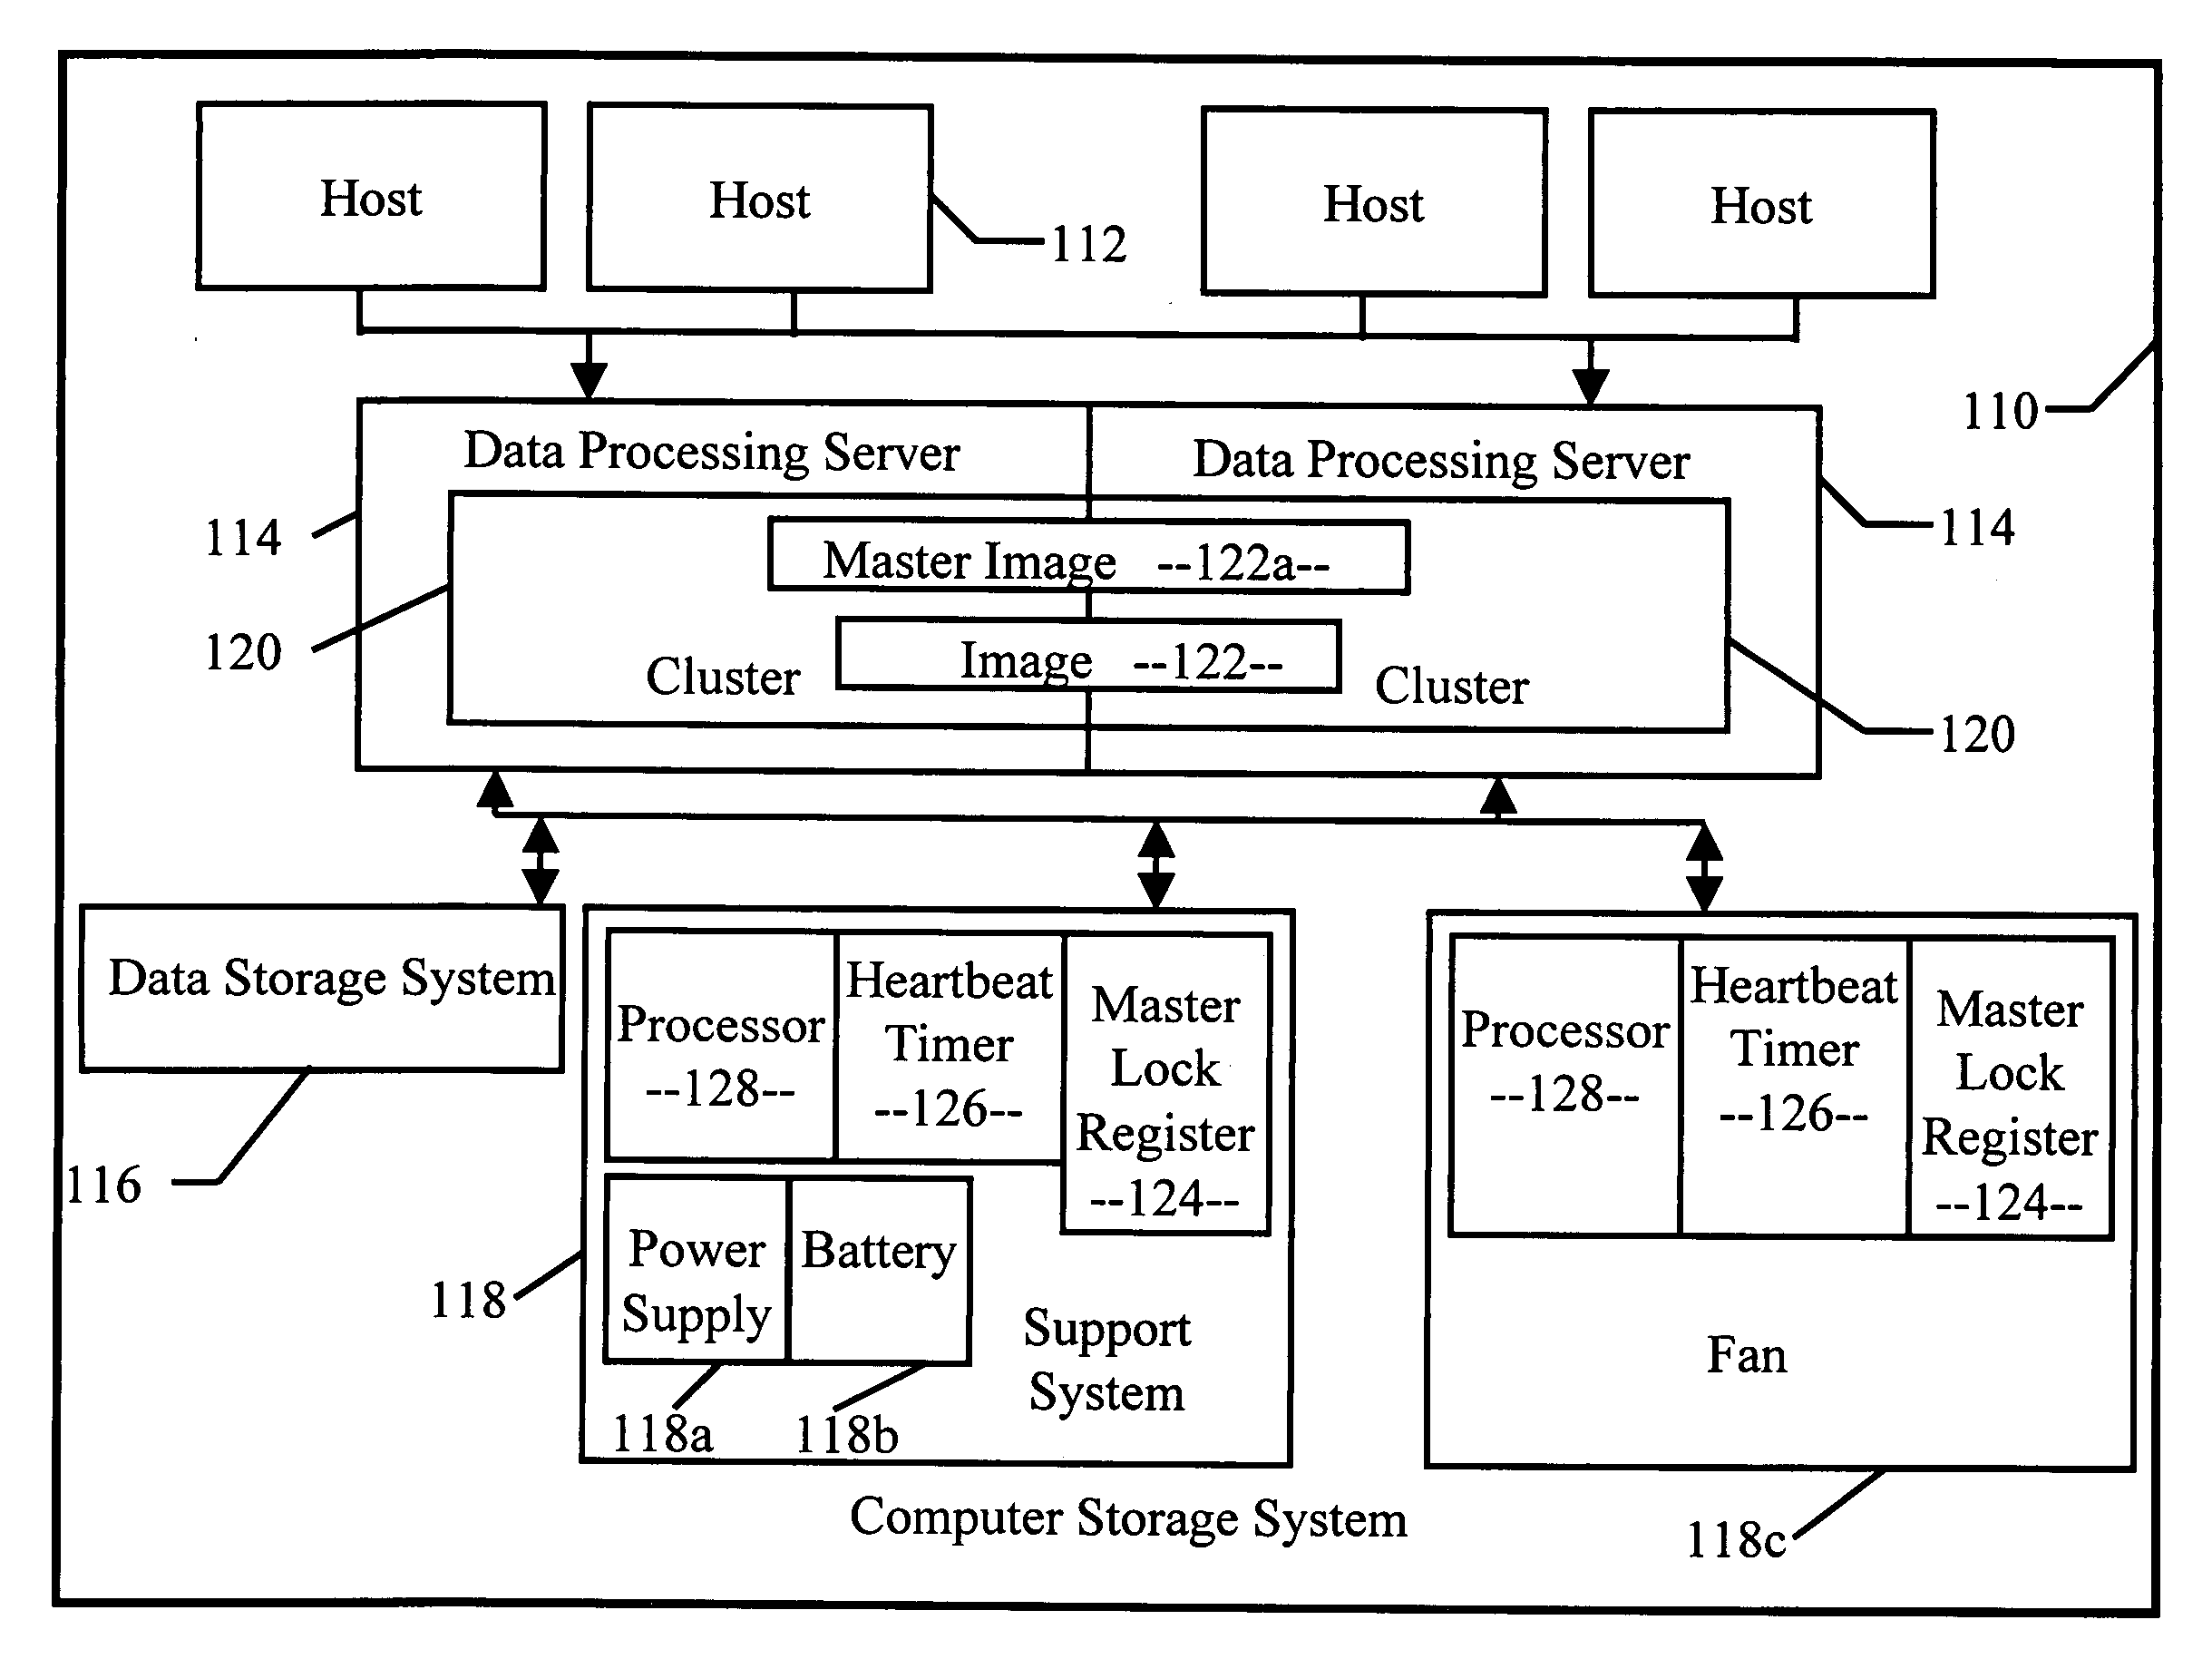 Management system for computer support systems